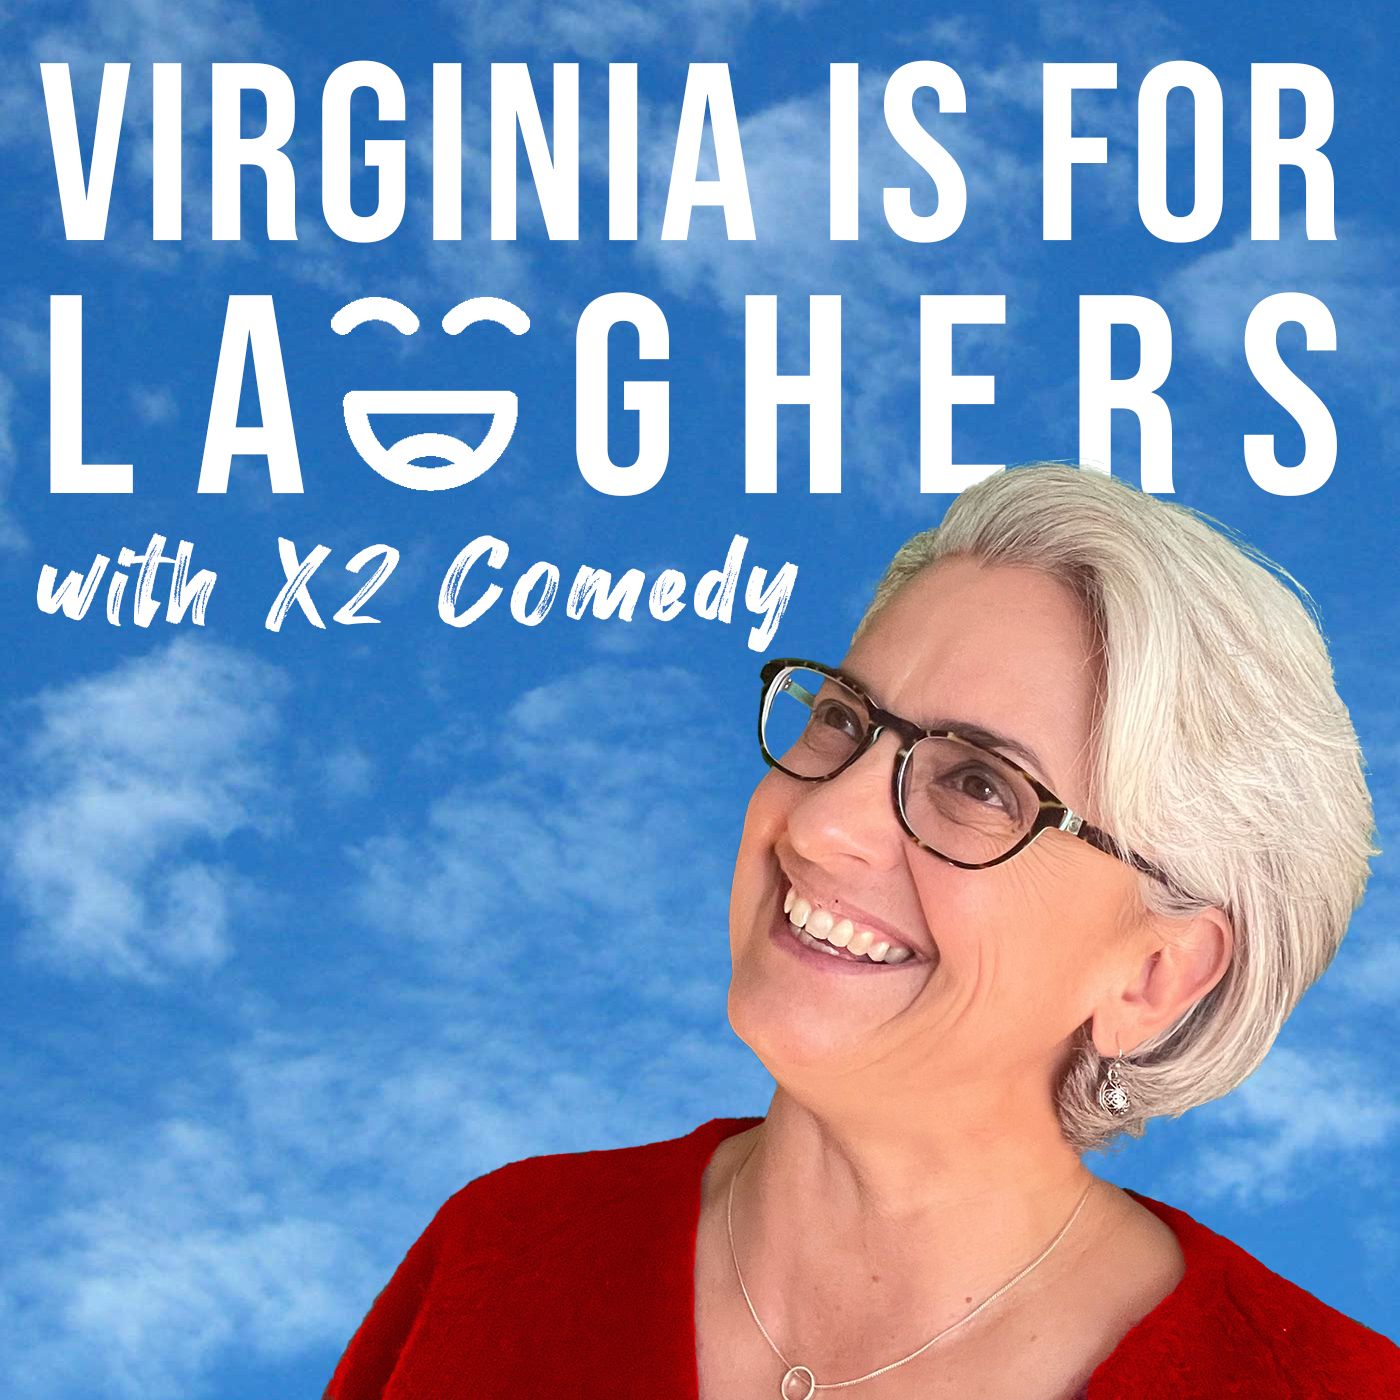 Virginia Is For Laughers with X2 Comedy